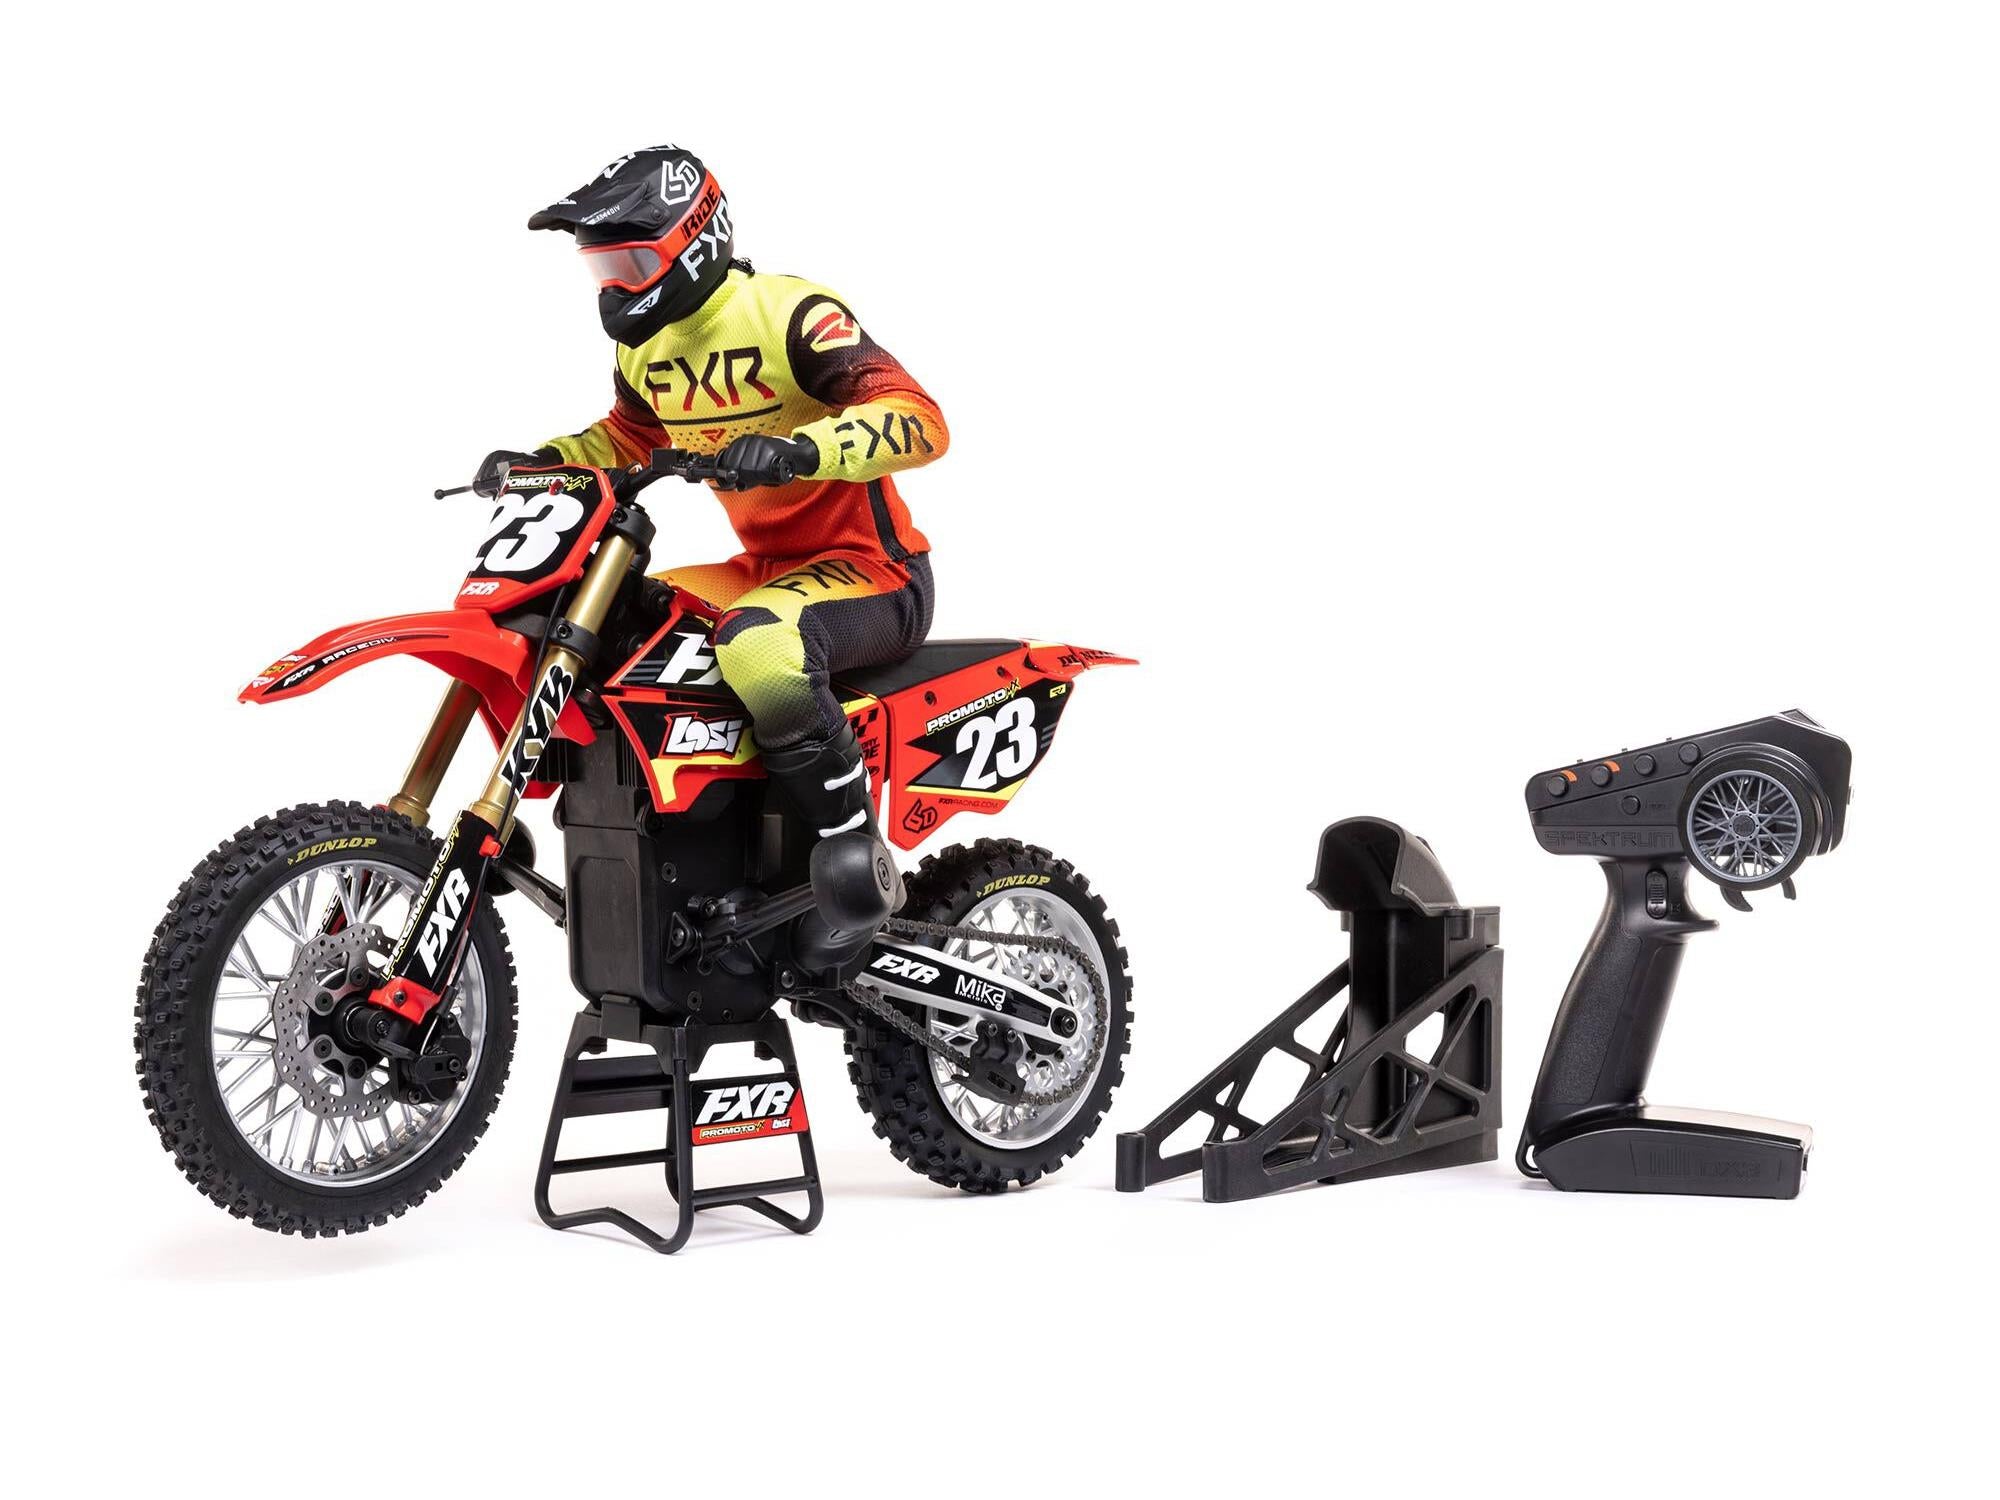 Red 1/4 scale Promoto-MX Motorcycle RTR, FXR model on a white background